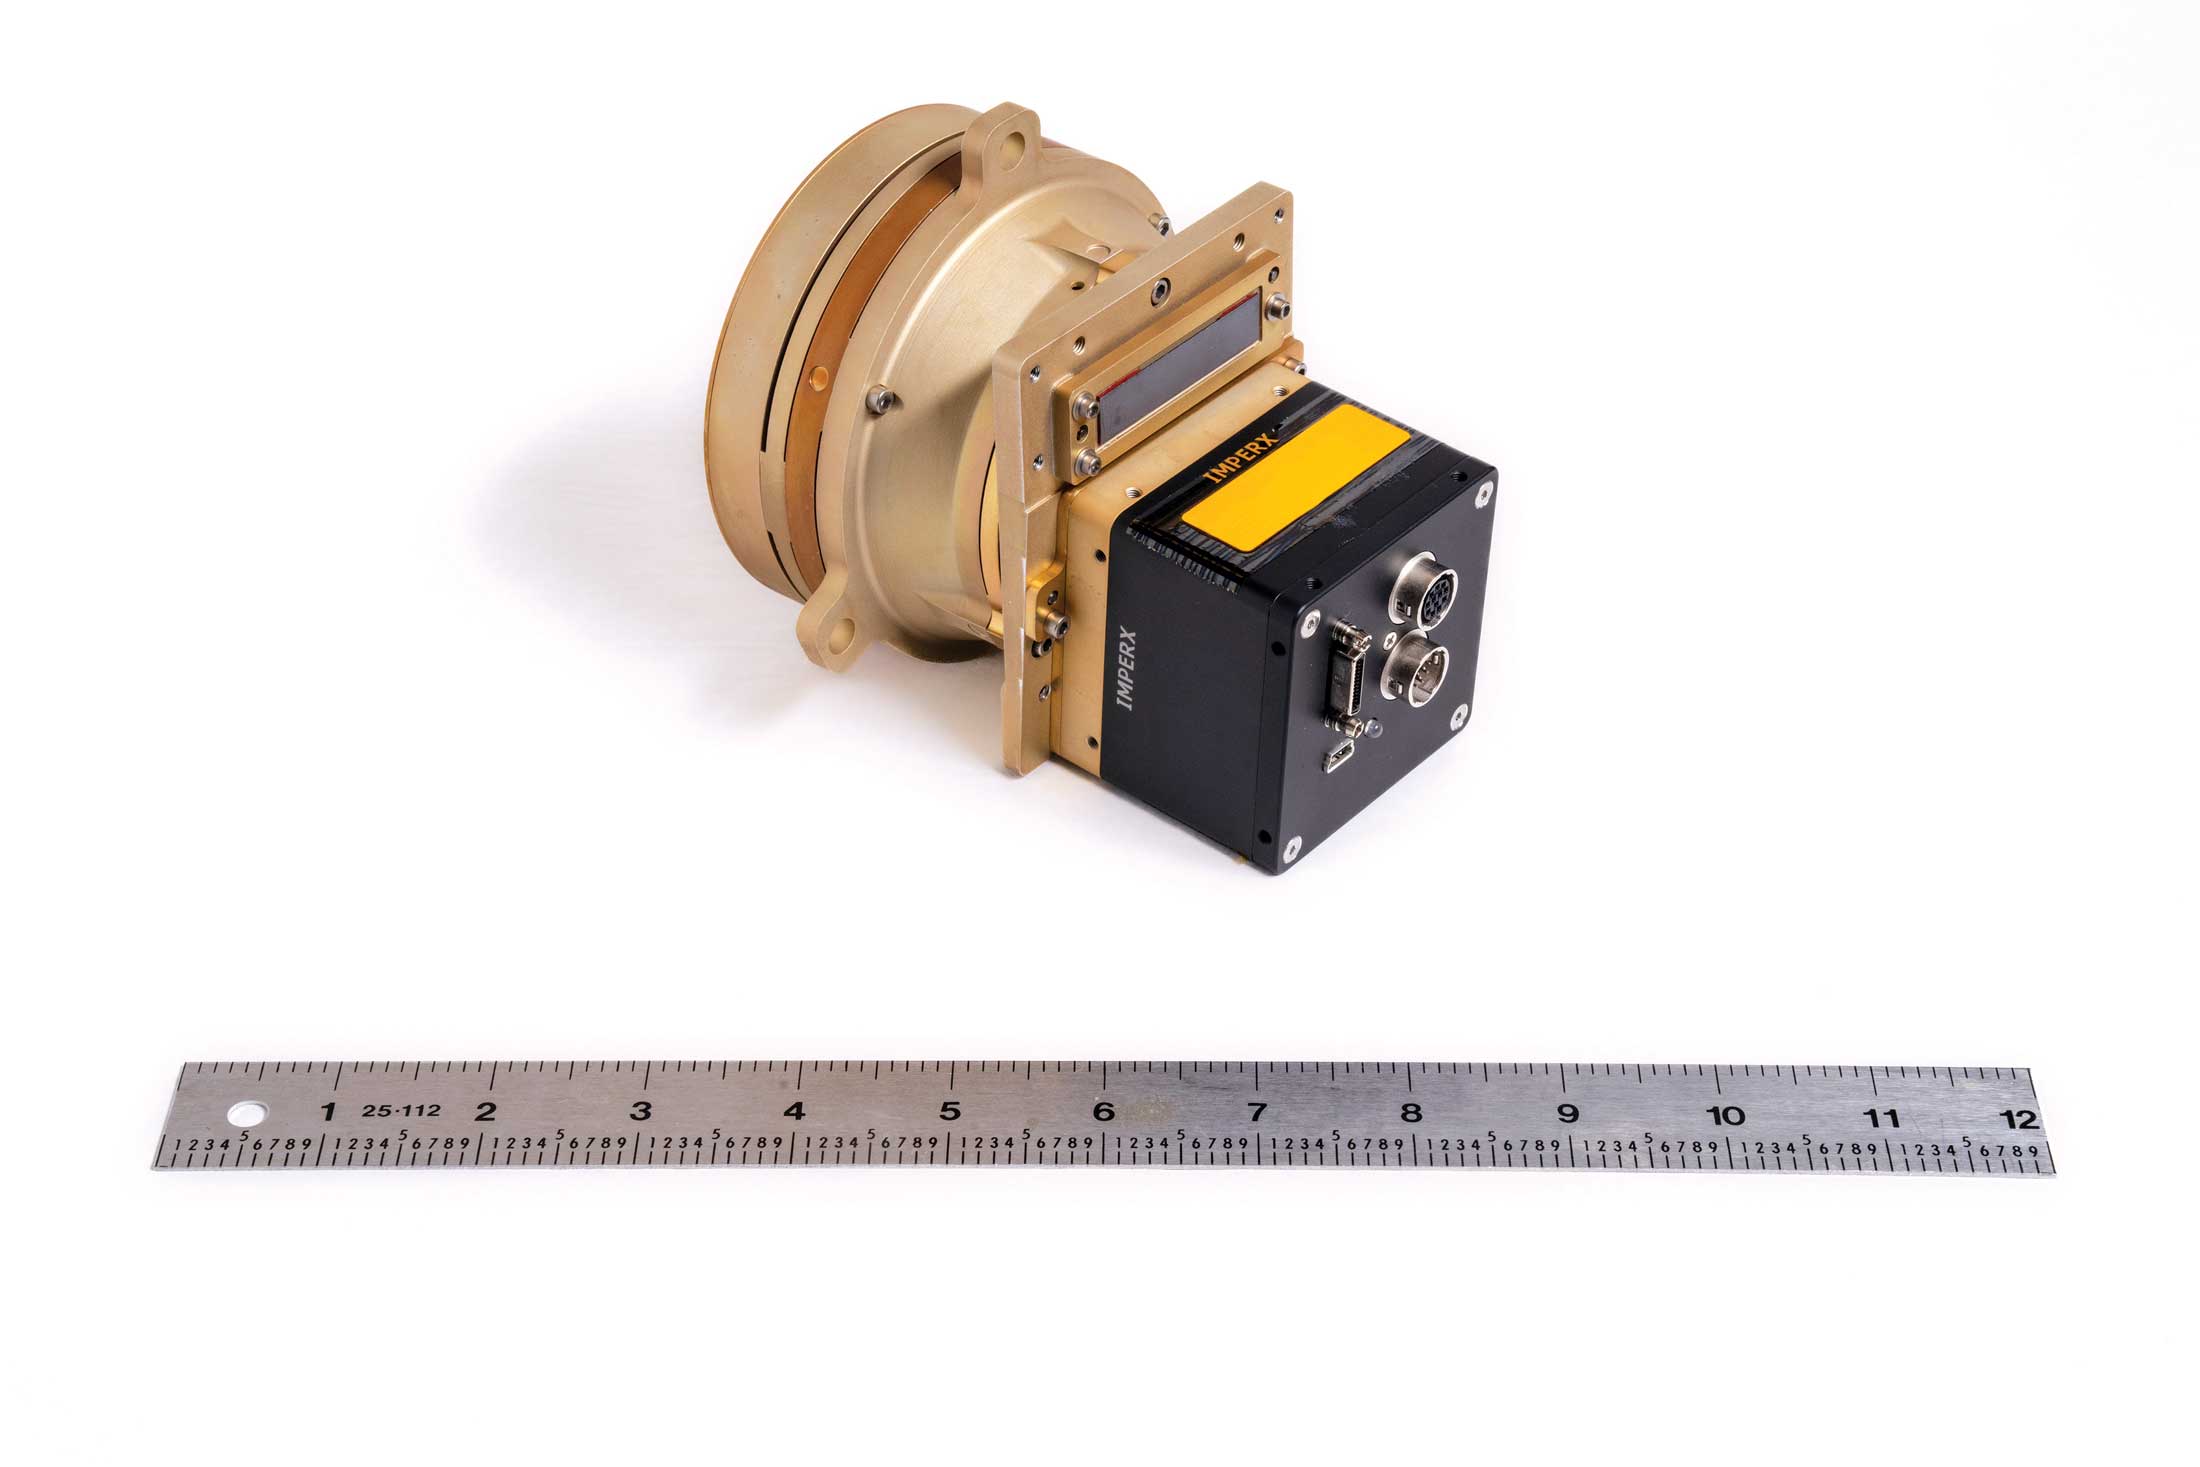 Photo of the prototype of the Chrisp Compact VNIR/SWIR Imaging Spectrometer with ruler beneath for scale.